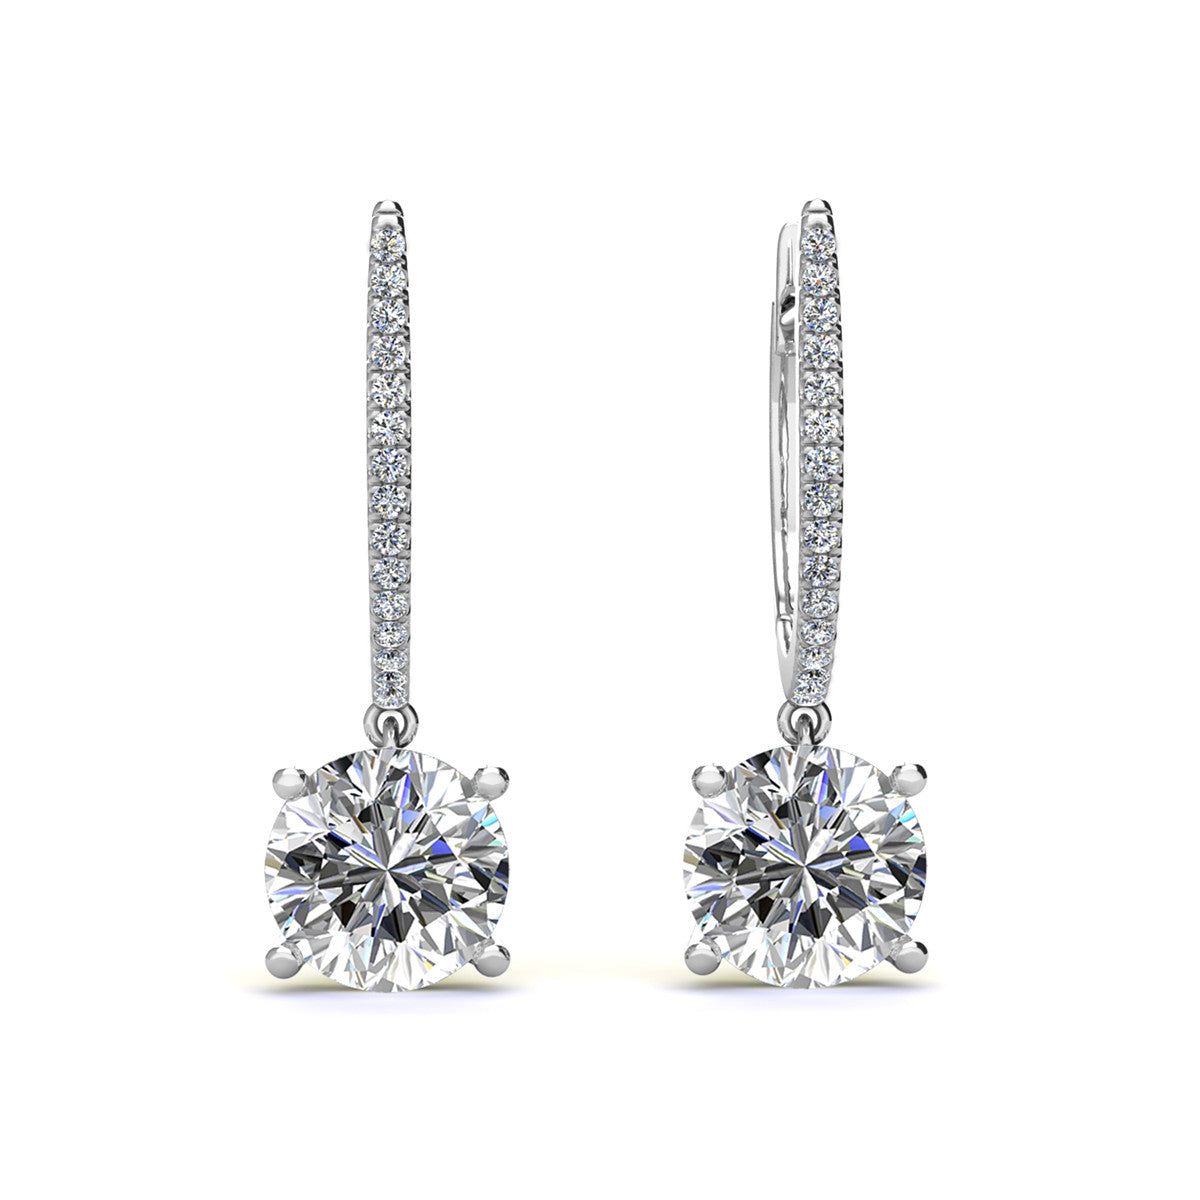 Moissanite by Cate & Chloe Finley Sterling Silver Drop Earrings with Moissanite Crystals